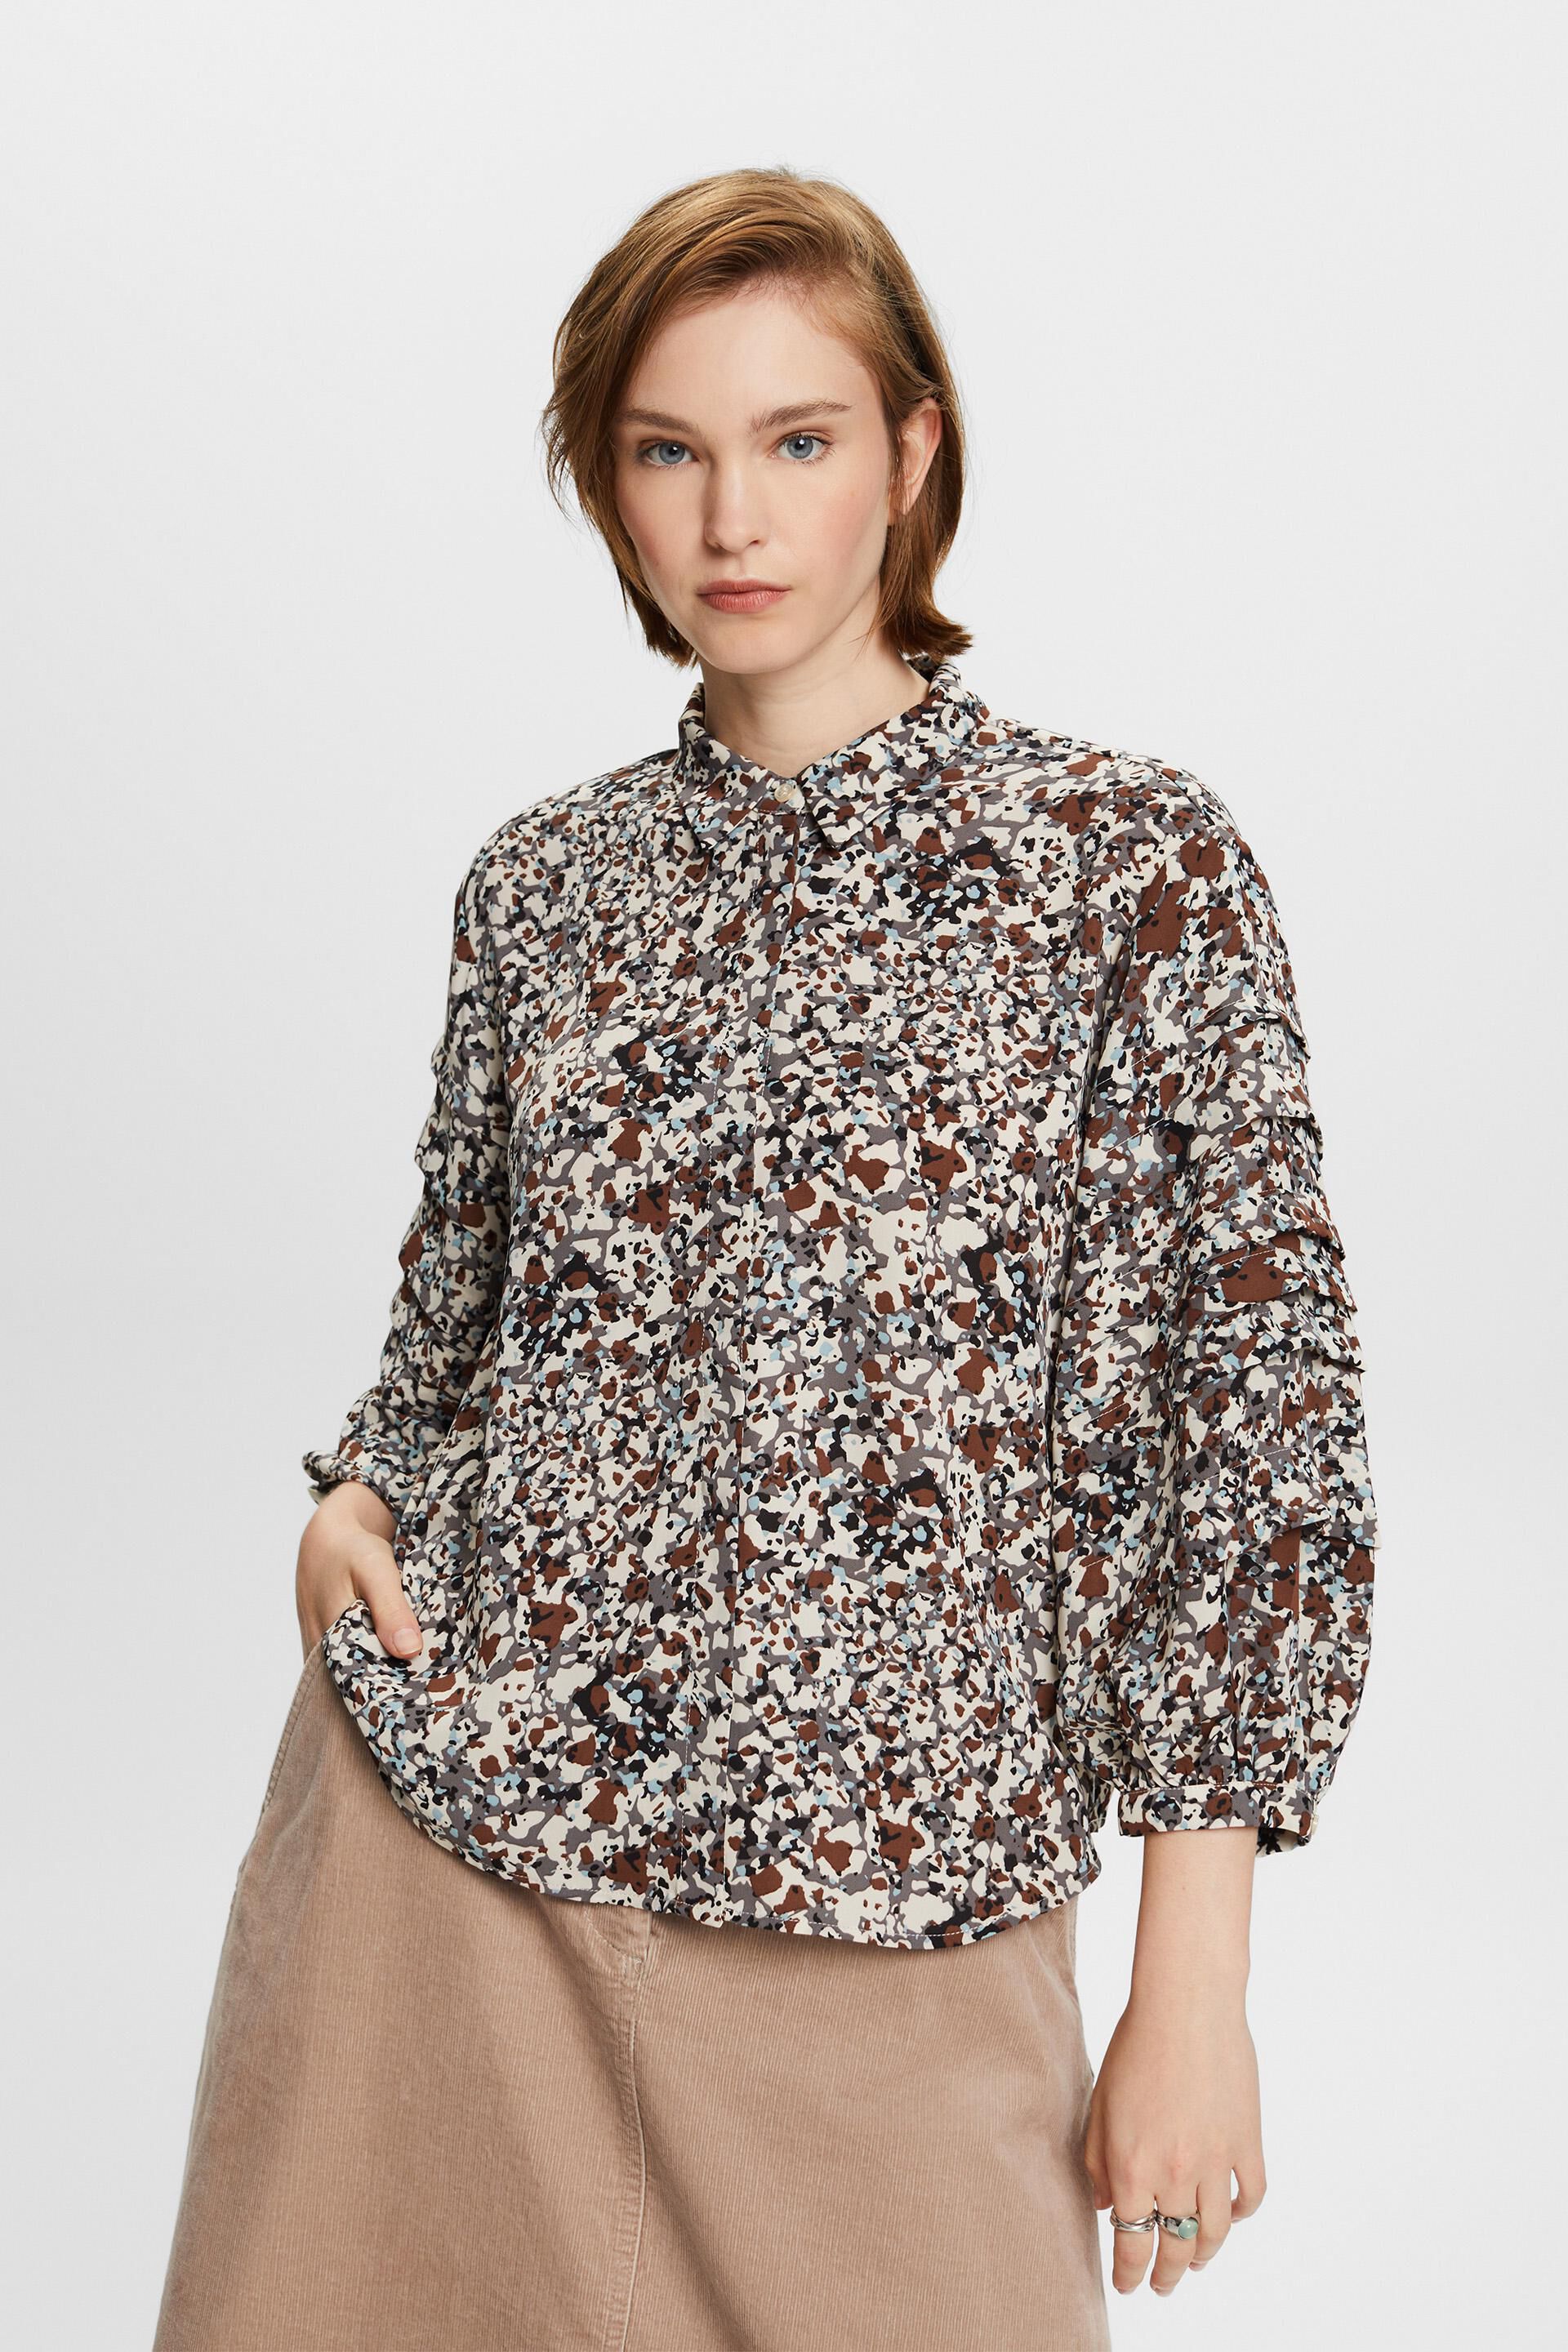 Esprit blouse patterned Recycled: